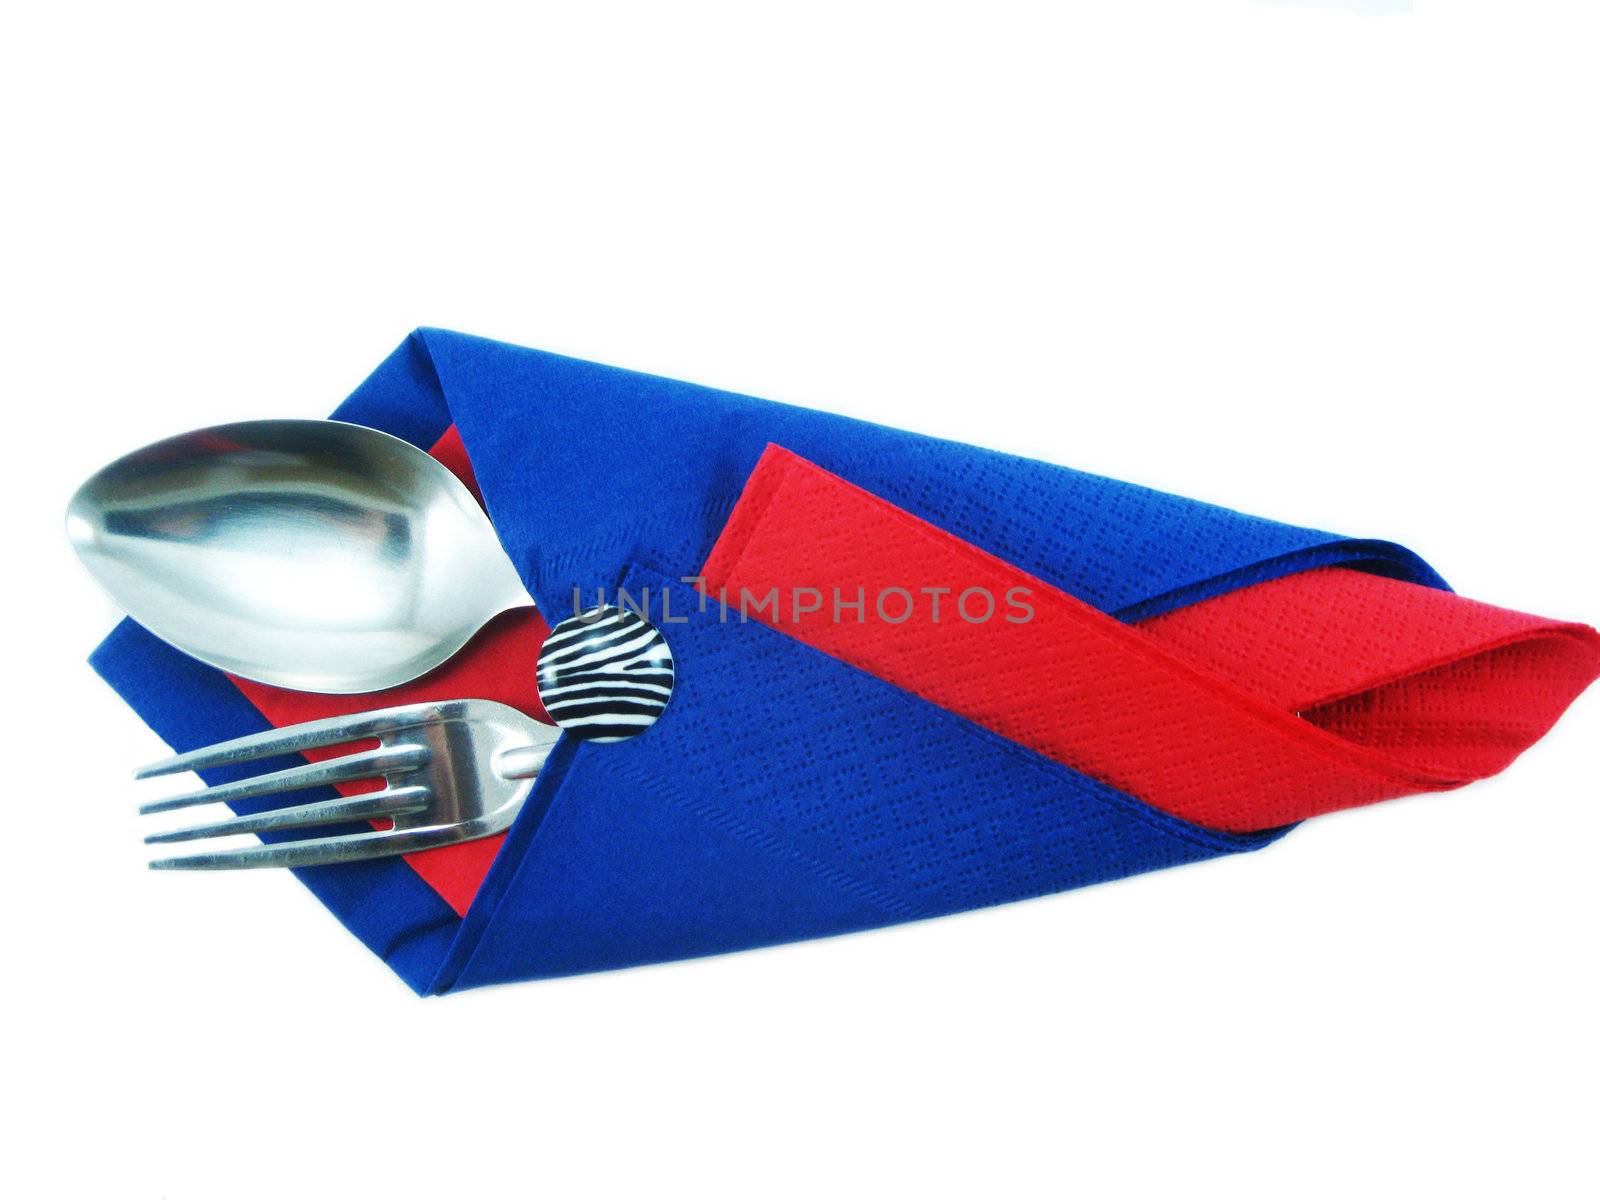 Dining facilities, plug and spoon in a red and dark blue napkin
